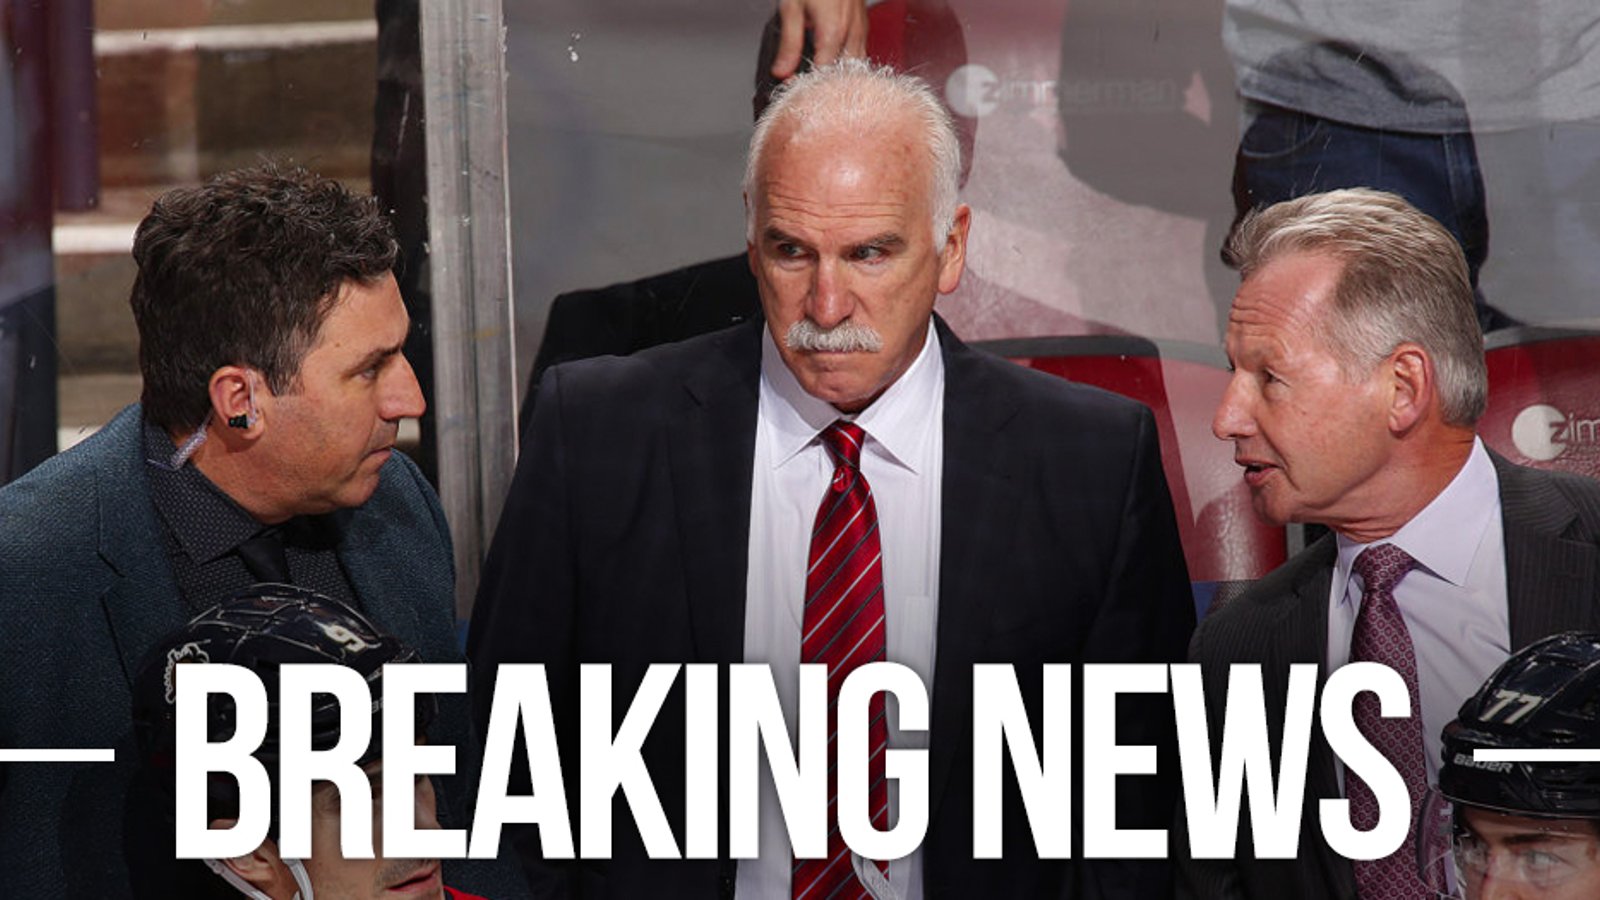 Panthers coach Mike Kitchen reportedly set to resign after physical altercation with player